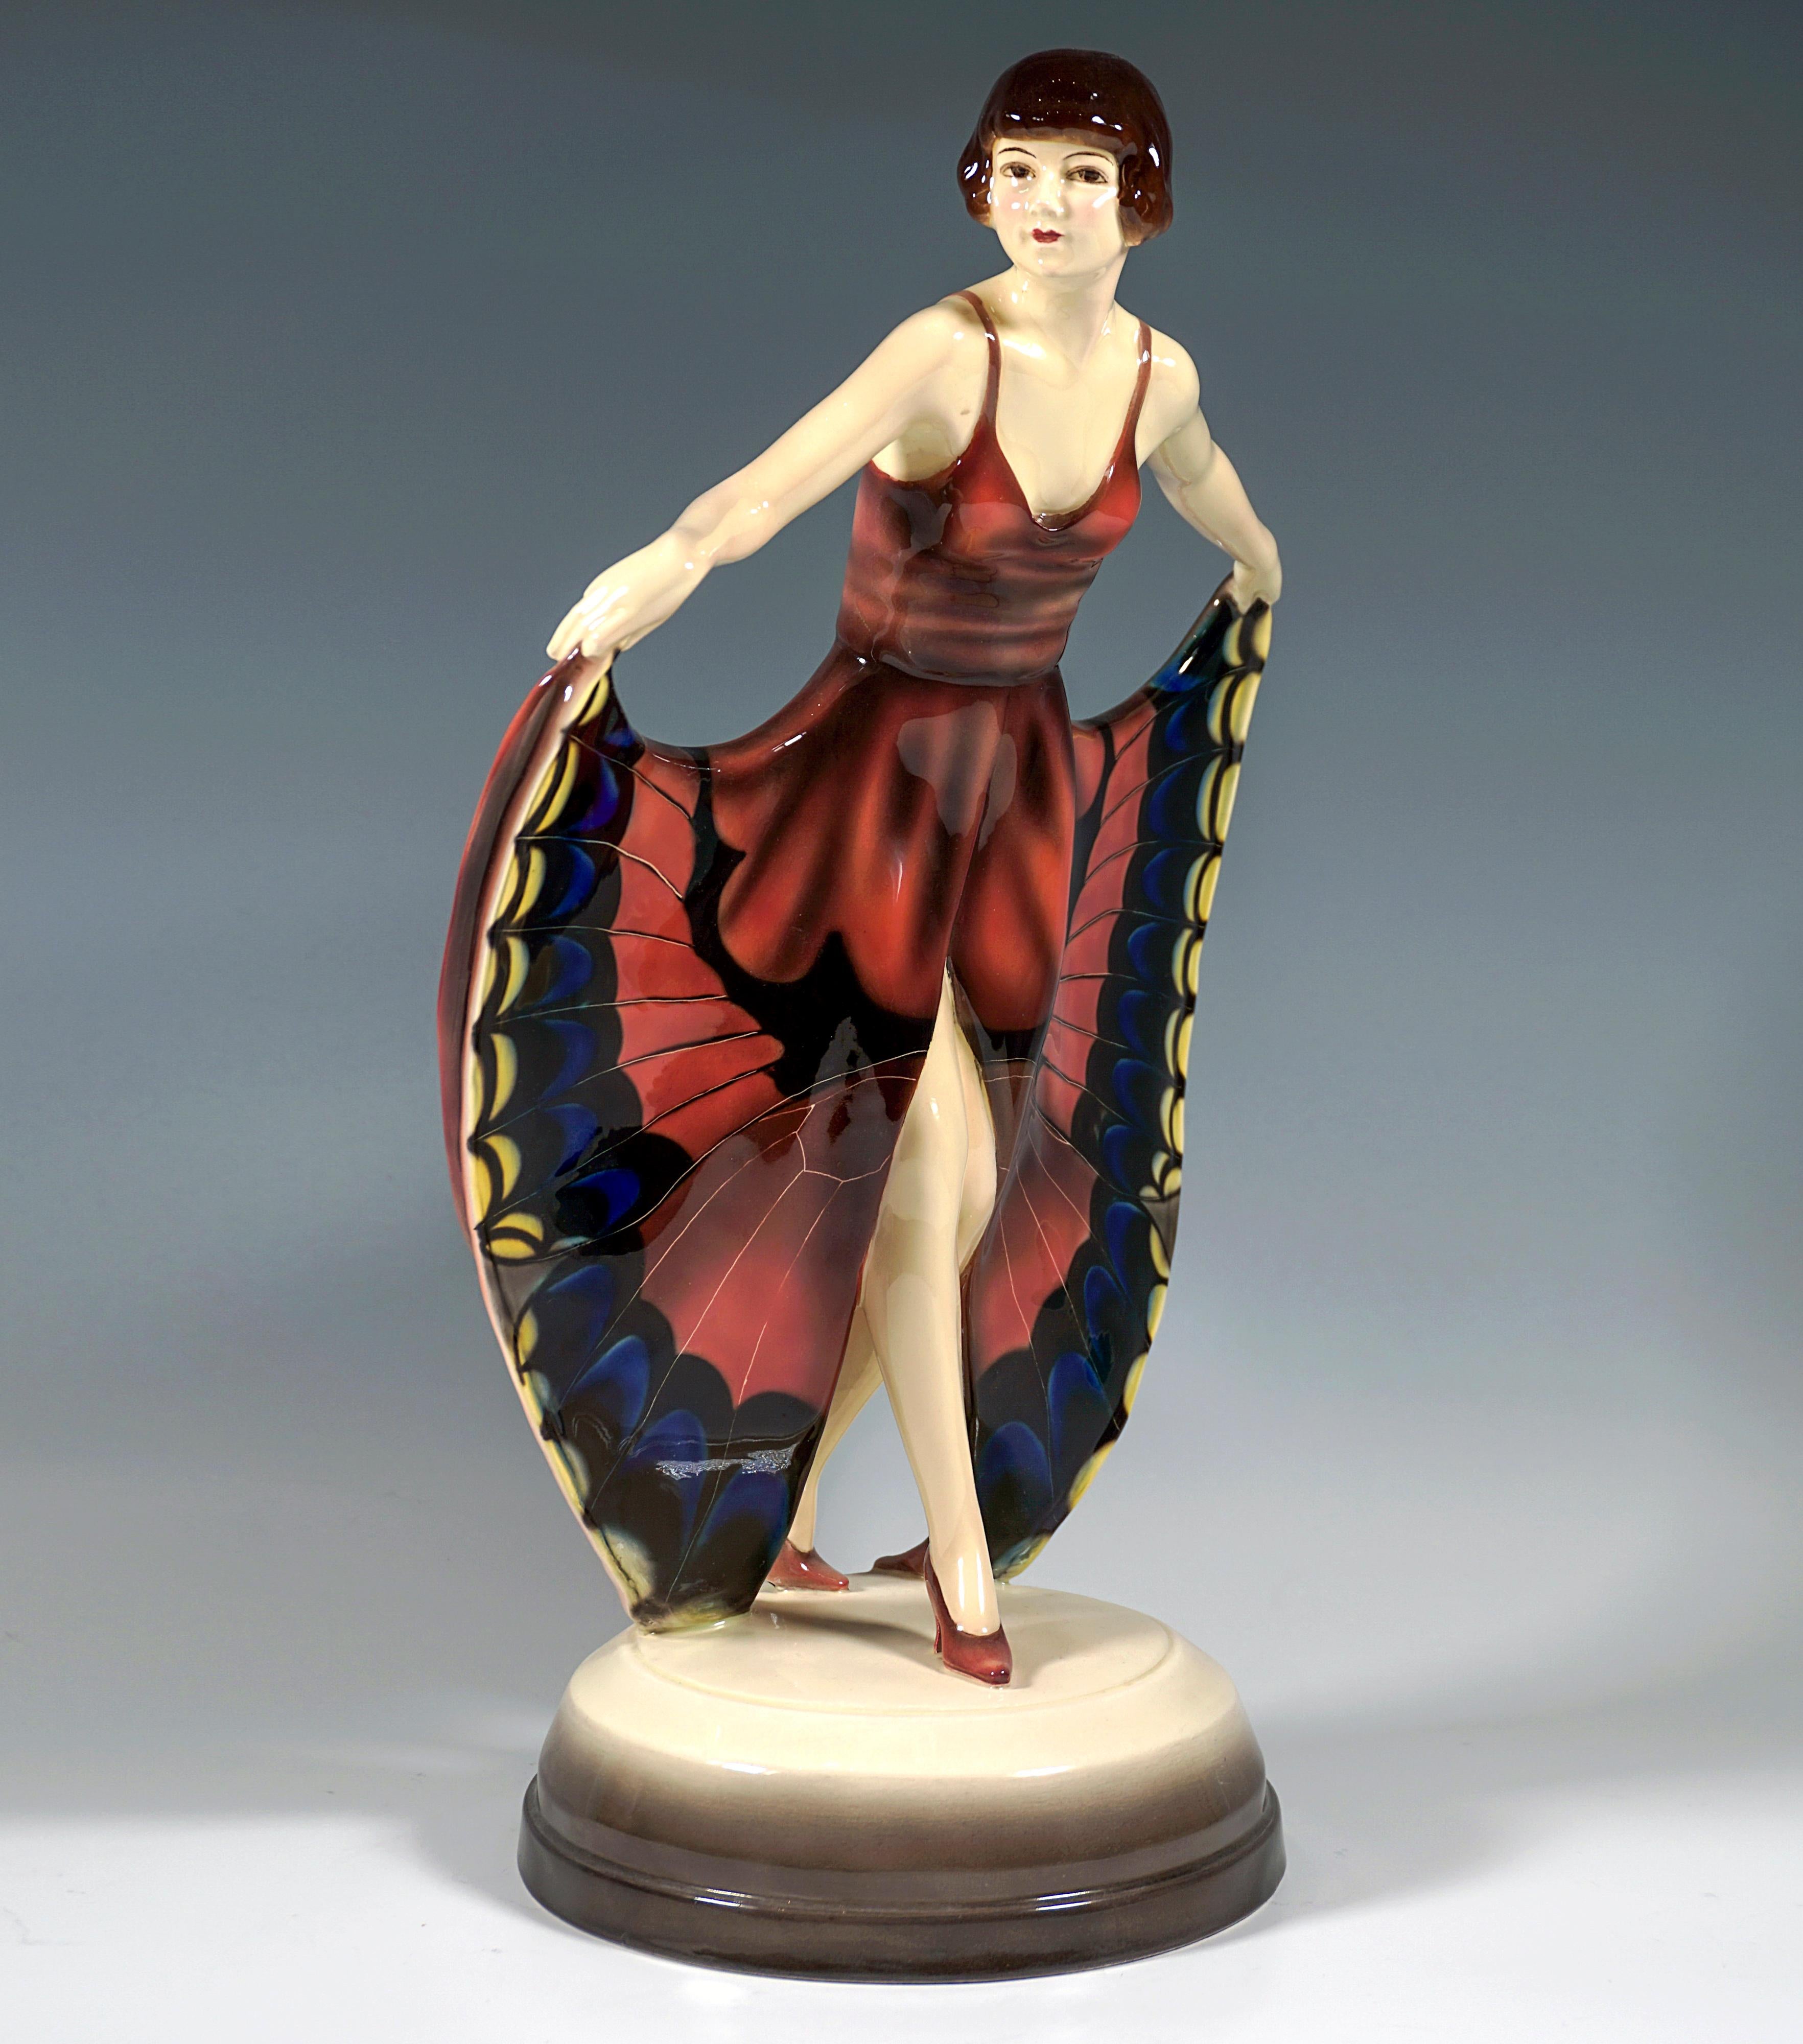 Rare Goldscheider Art Deco ceramic figure of the 1920's: 
Young dancer with pageboy hairstyle, leaning slightly forward and looking to the right, putting her right leg forward and holding the high slit skirt with butterfly decoration like wings with